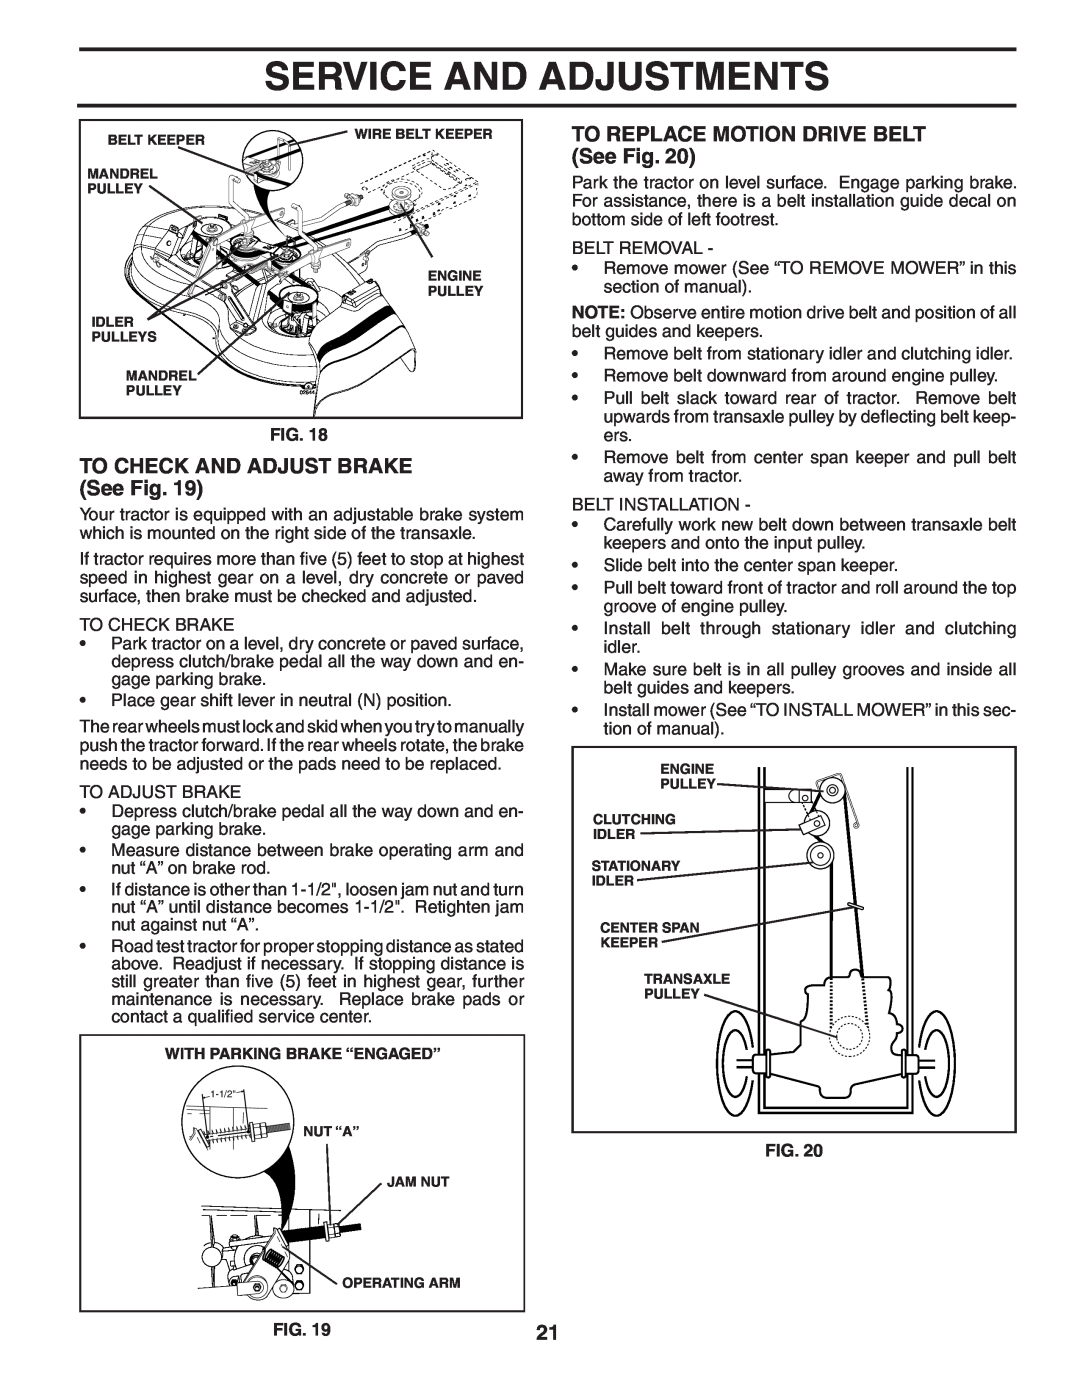 Weed Eater 405209, 60614 TO CHECK AND ADJUST BRAKE See Fig, TO REPLACE MOTION DRIVE BELT See Fig, Service And Adjustments 